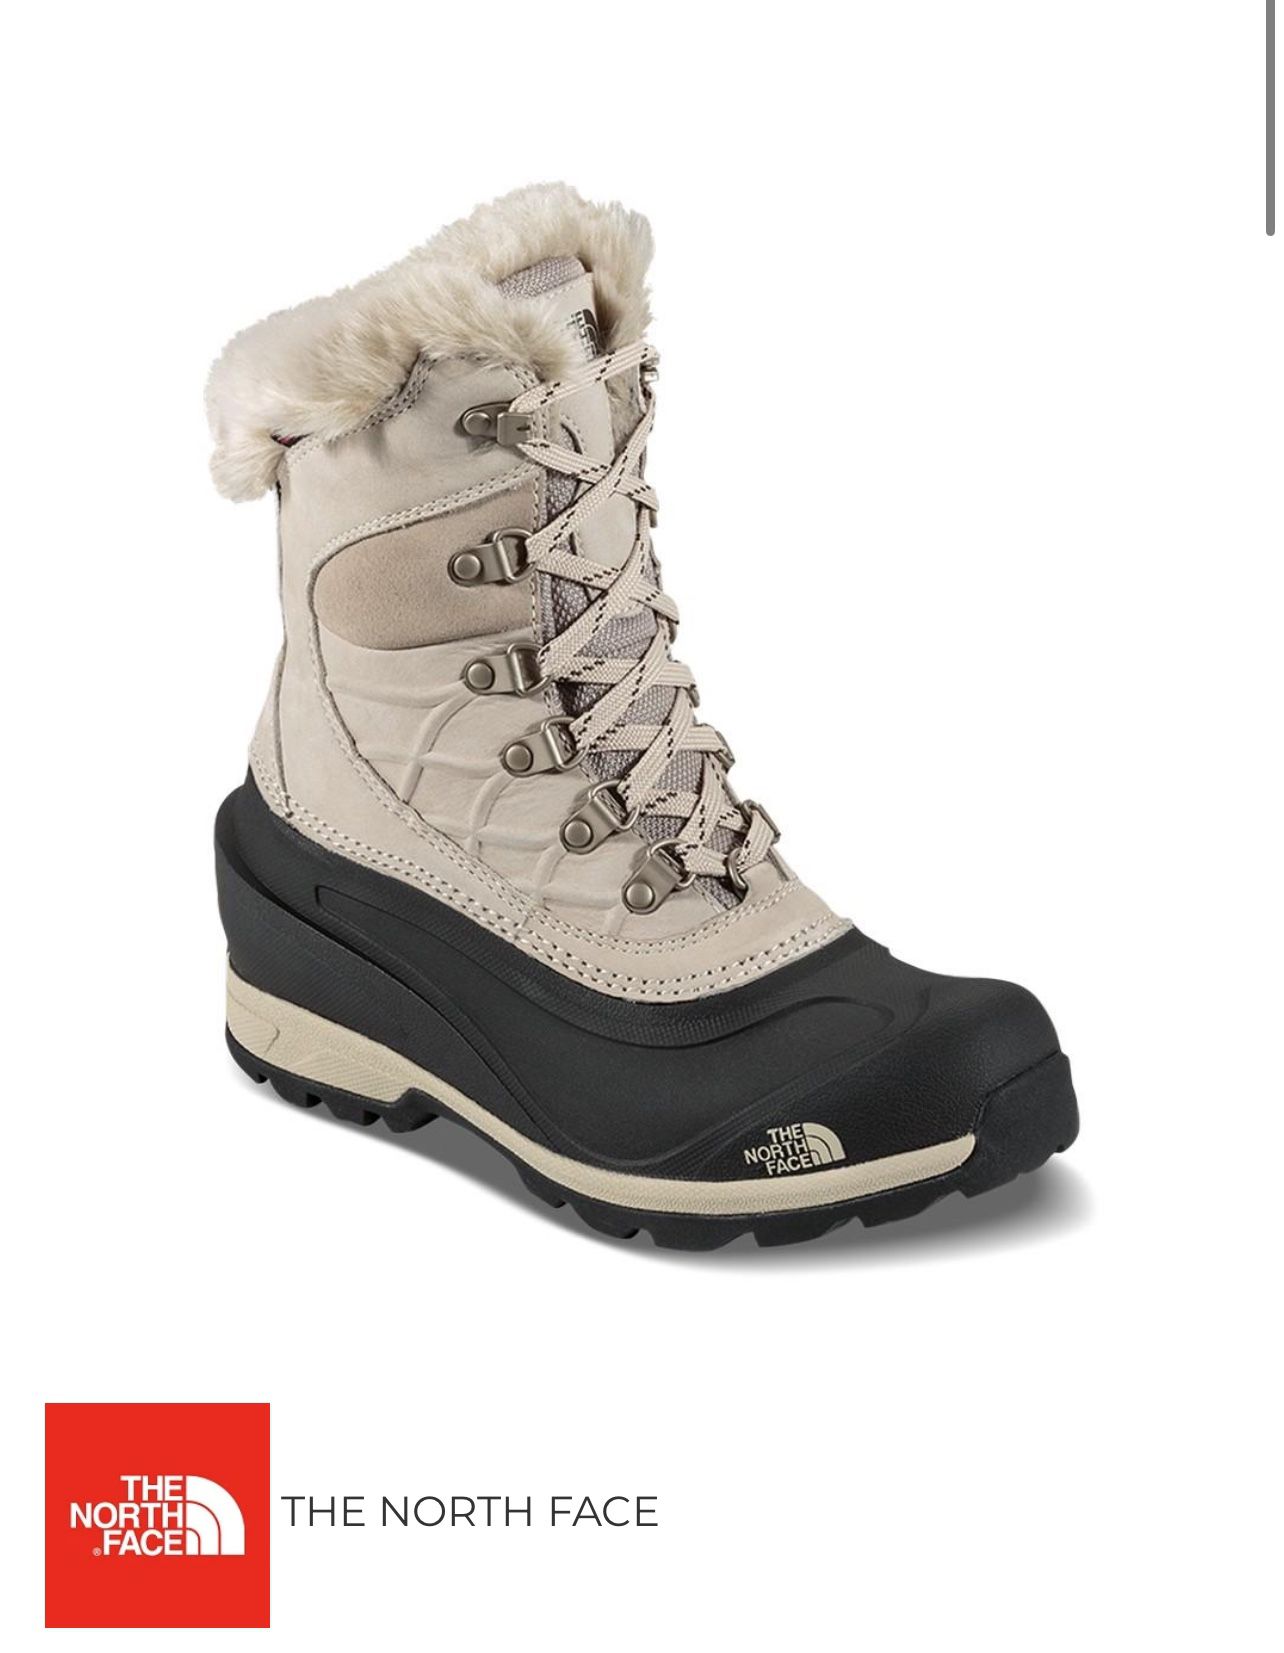 The North Face Snow Boots Women 